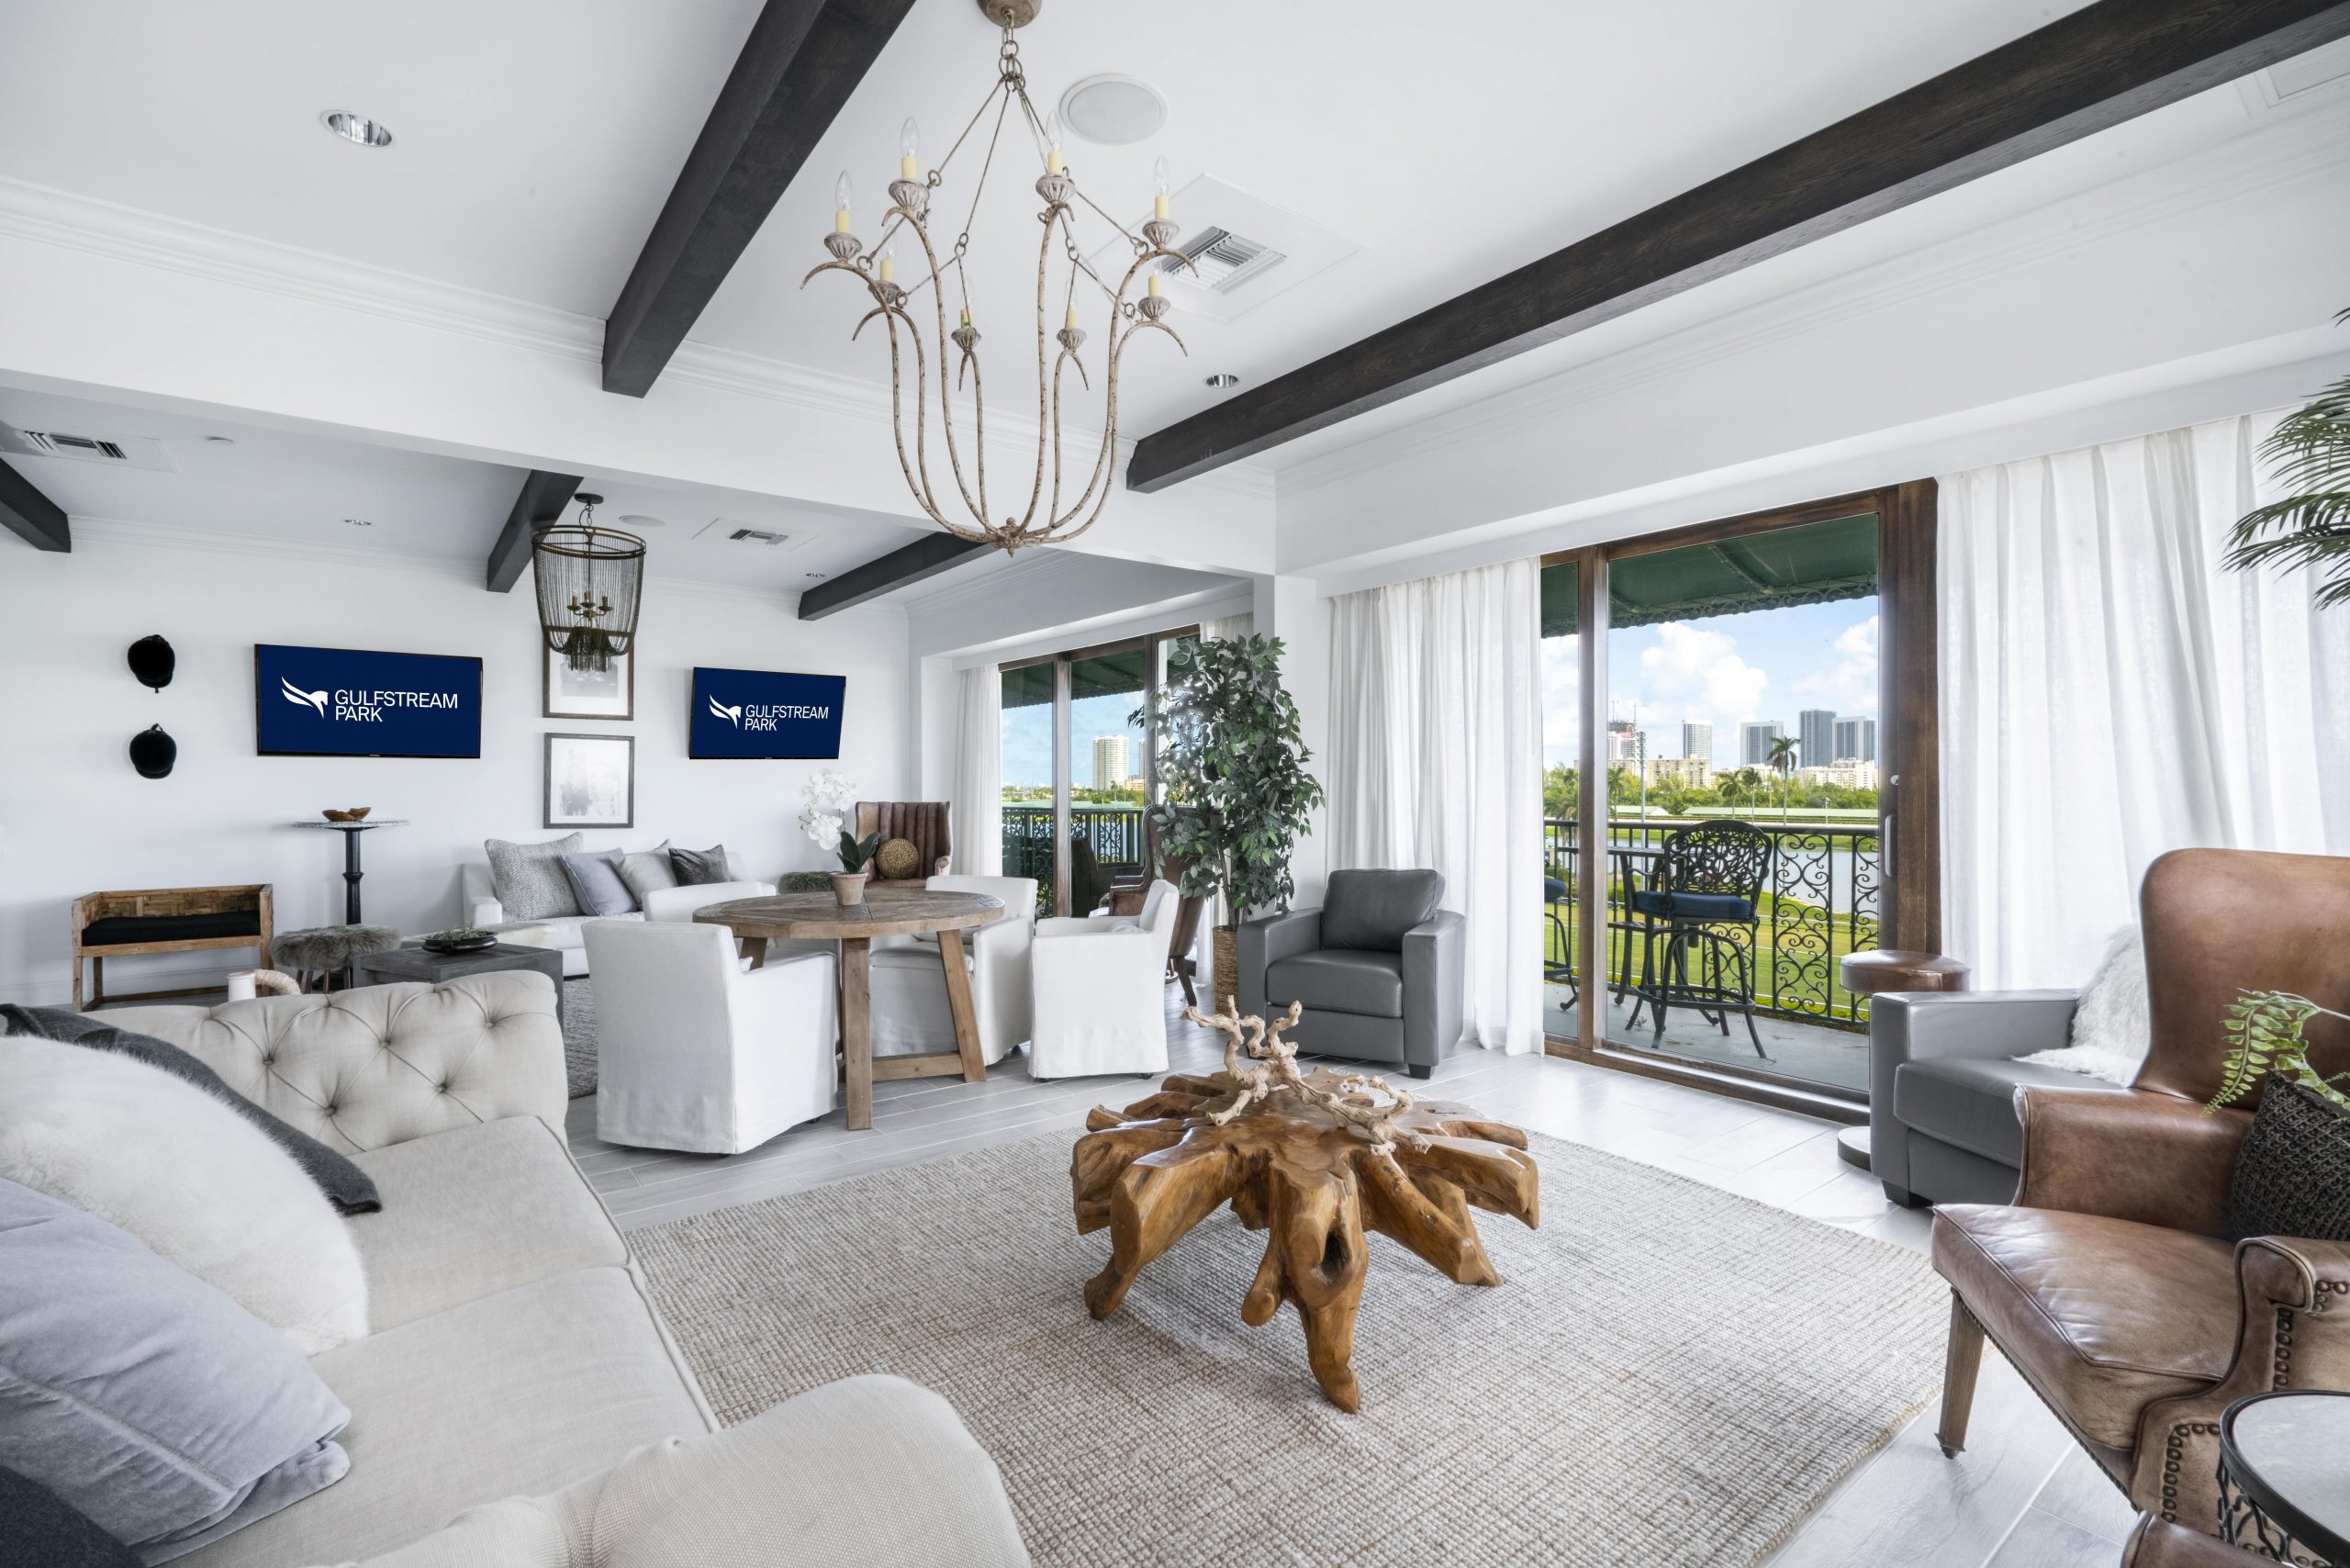 Living room arrangement of the VIP suites at Gulfstream Park